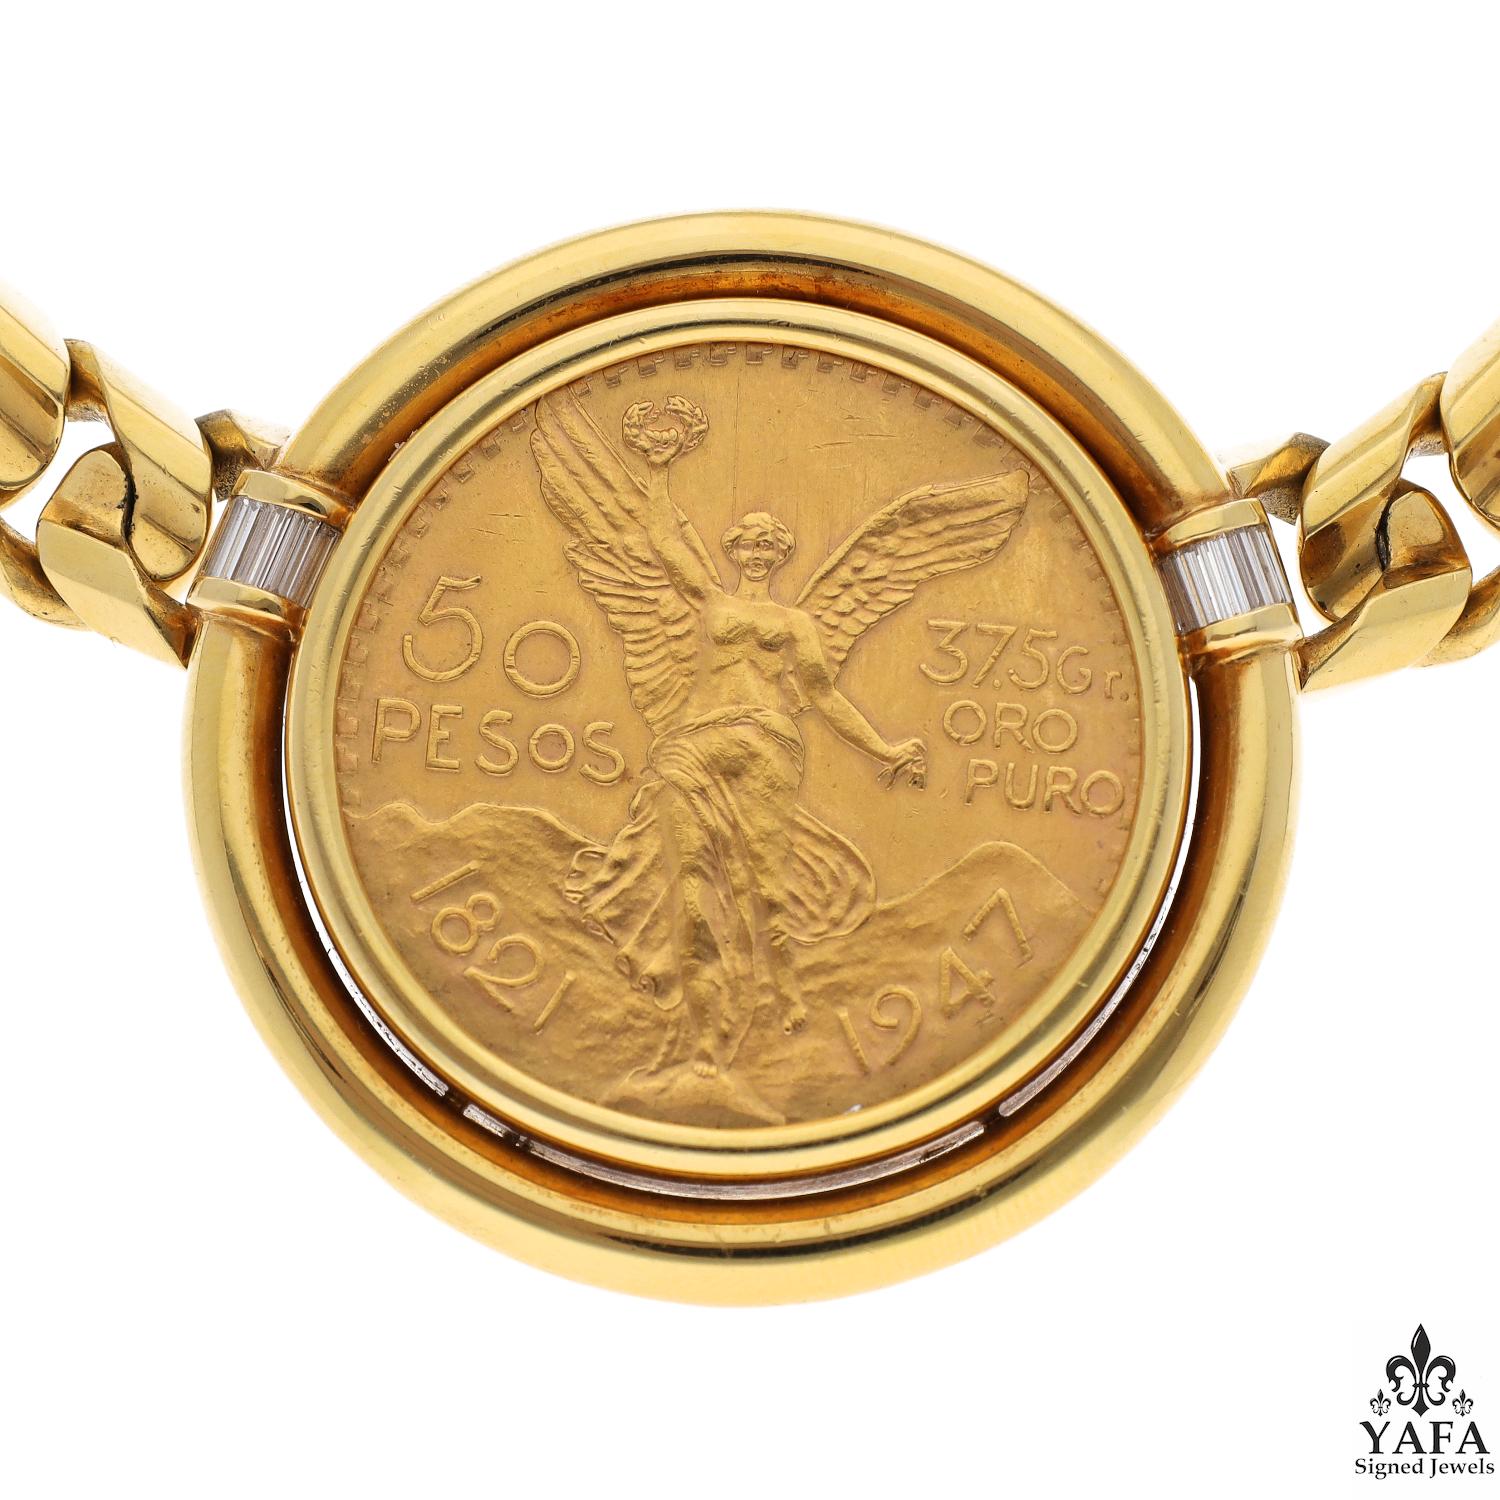 Bvlgari Rome Vintage Coins Of The World Diamond Italian Yellow Gold Necklace From Our Signed Jewels Vintage Collection.

Bulgari Rome set the trend in the 1970s for mounting Ancient to Modern coins in substantial gold jewelry. Coins from the second